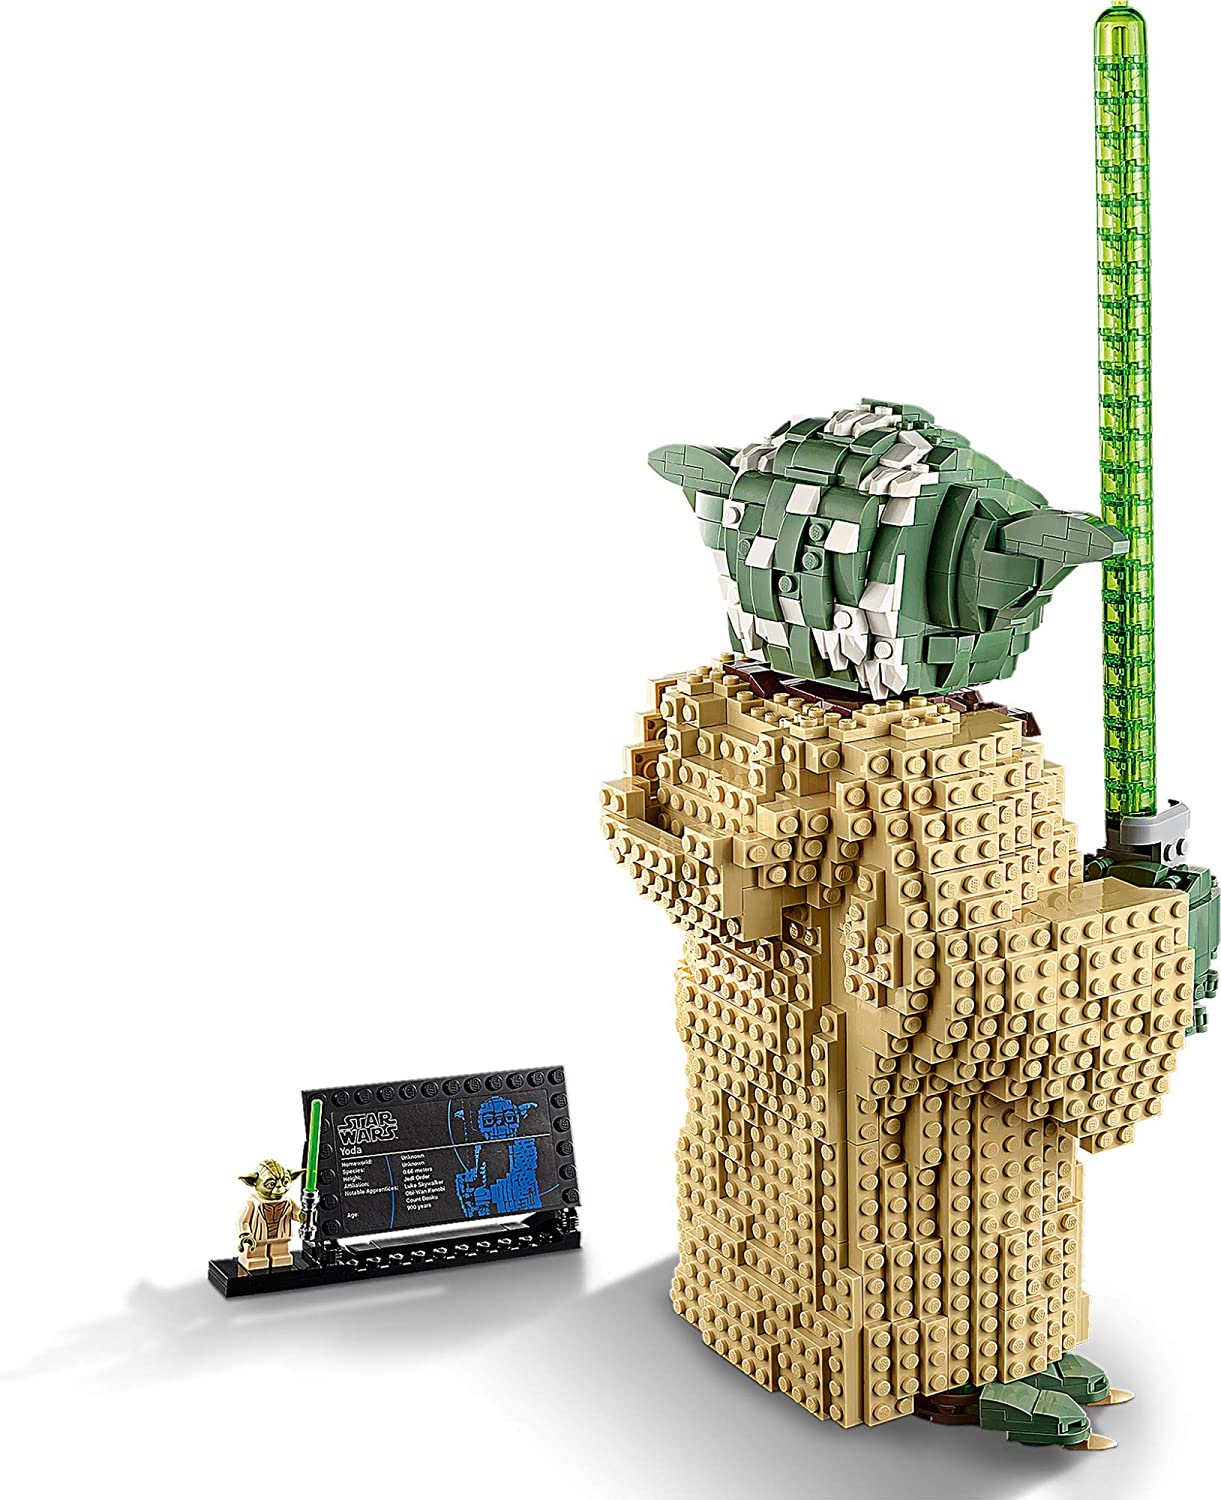 LEGO Star Wars: Attack of the Clones Yoda 75255 Yoda Building Model and Collectible Minifigure with Lightsaber (1,771 Pieces)